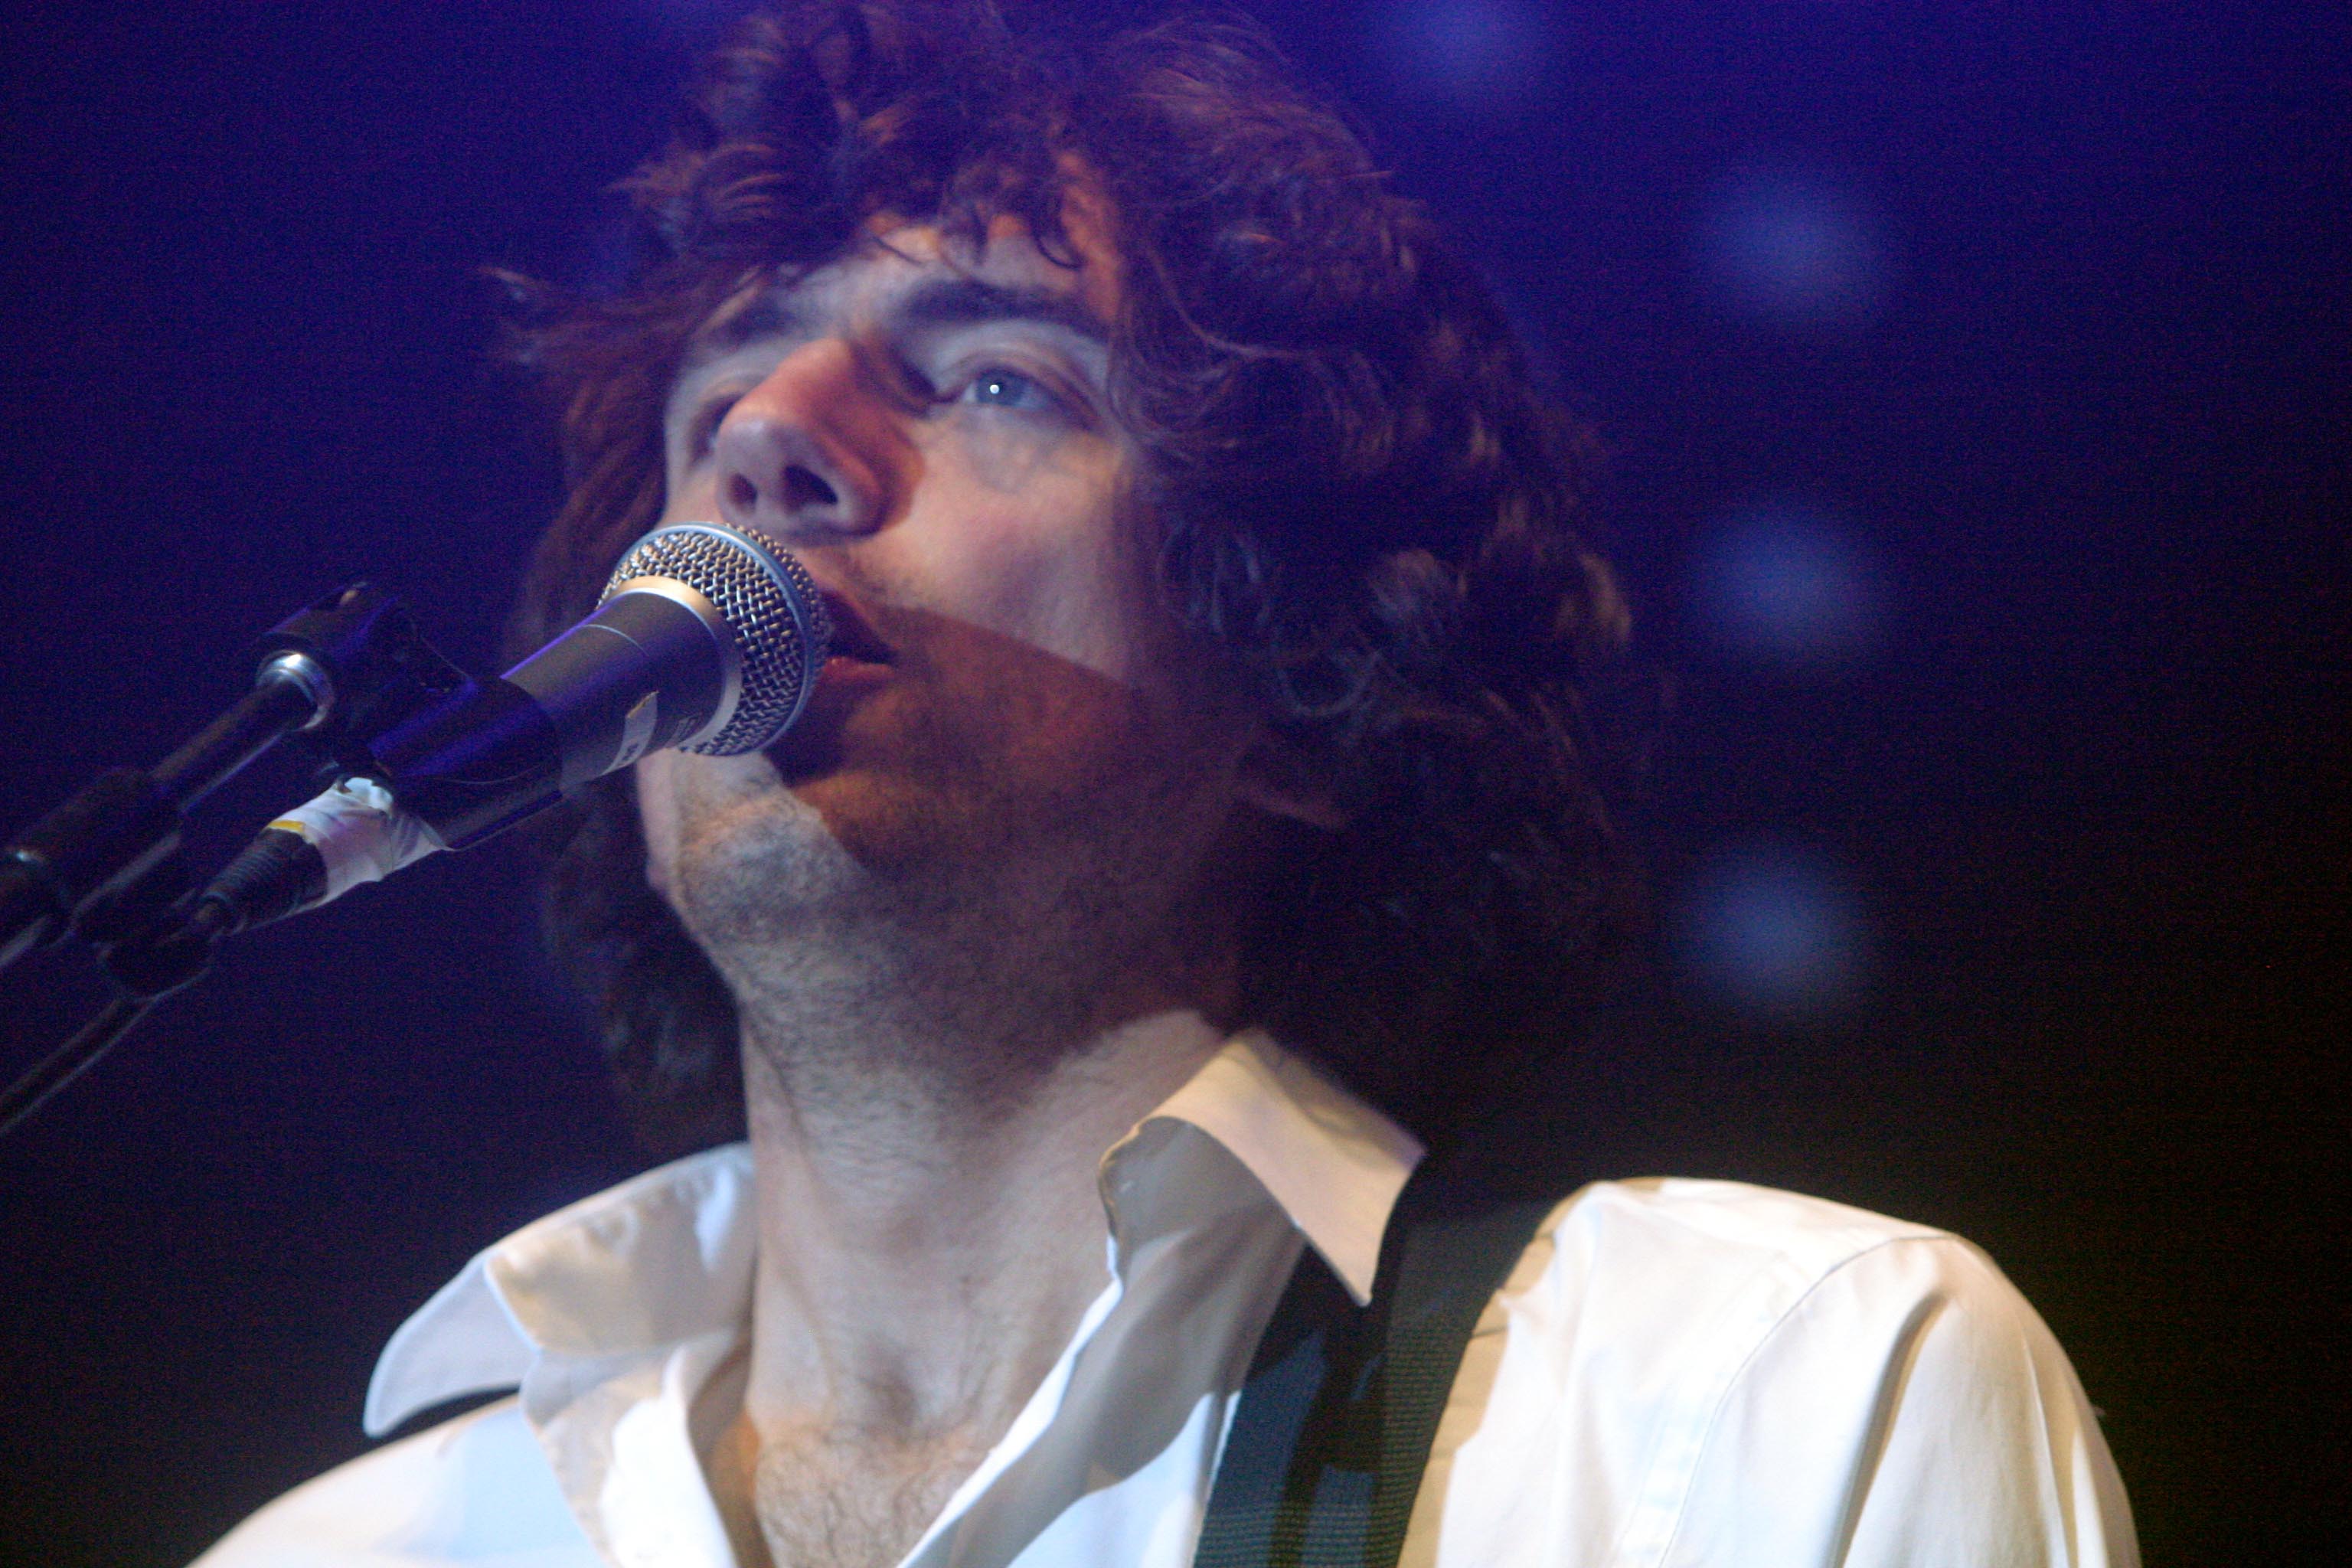 Snow Patrol at Radio One's Big Weekend in Dundee in 2006.